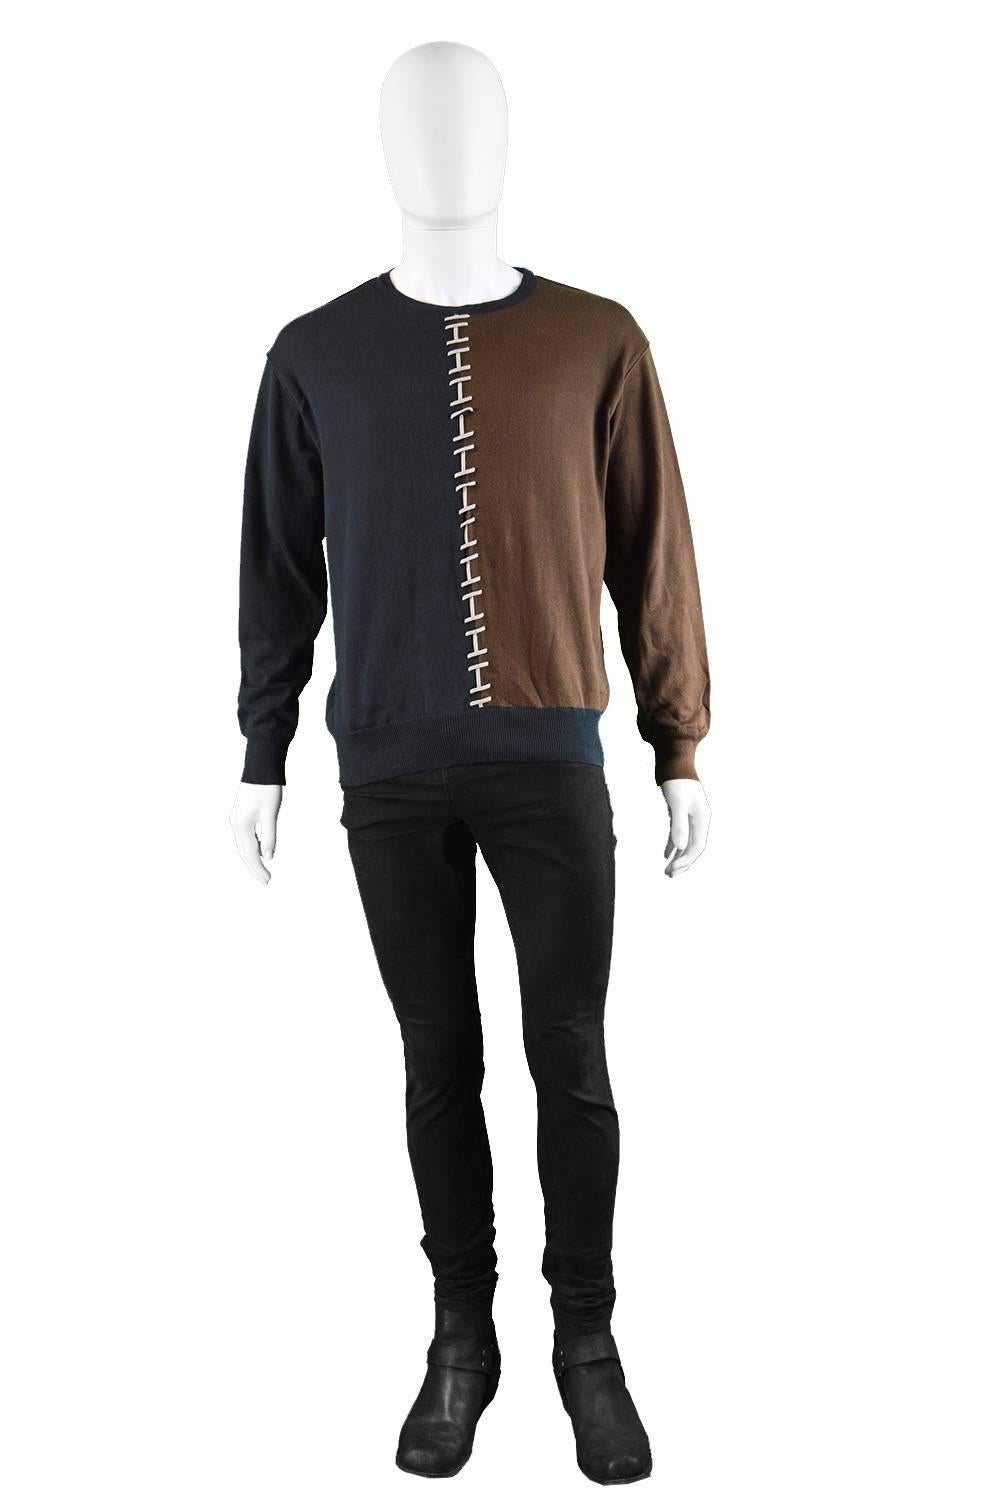 An awesome vintage men's sweatshirt / jumper from the 80s by legendary french designer, Claude Montana. In a black cotton fabric down one side and brown cotton on the other side to create a color blocking effect with a lace design in between, adding